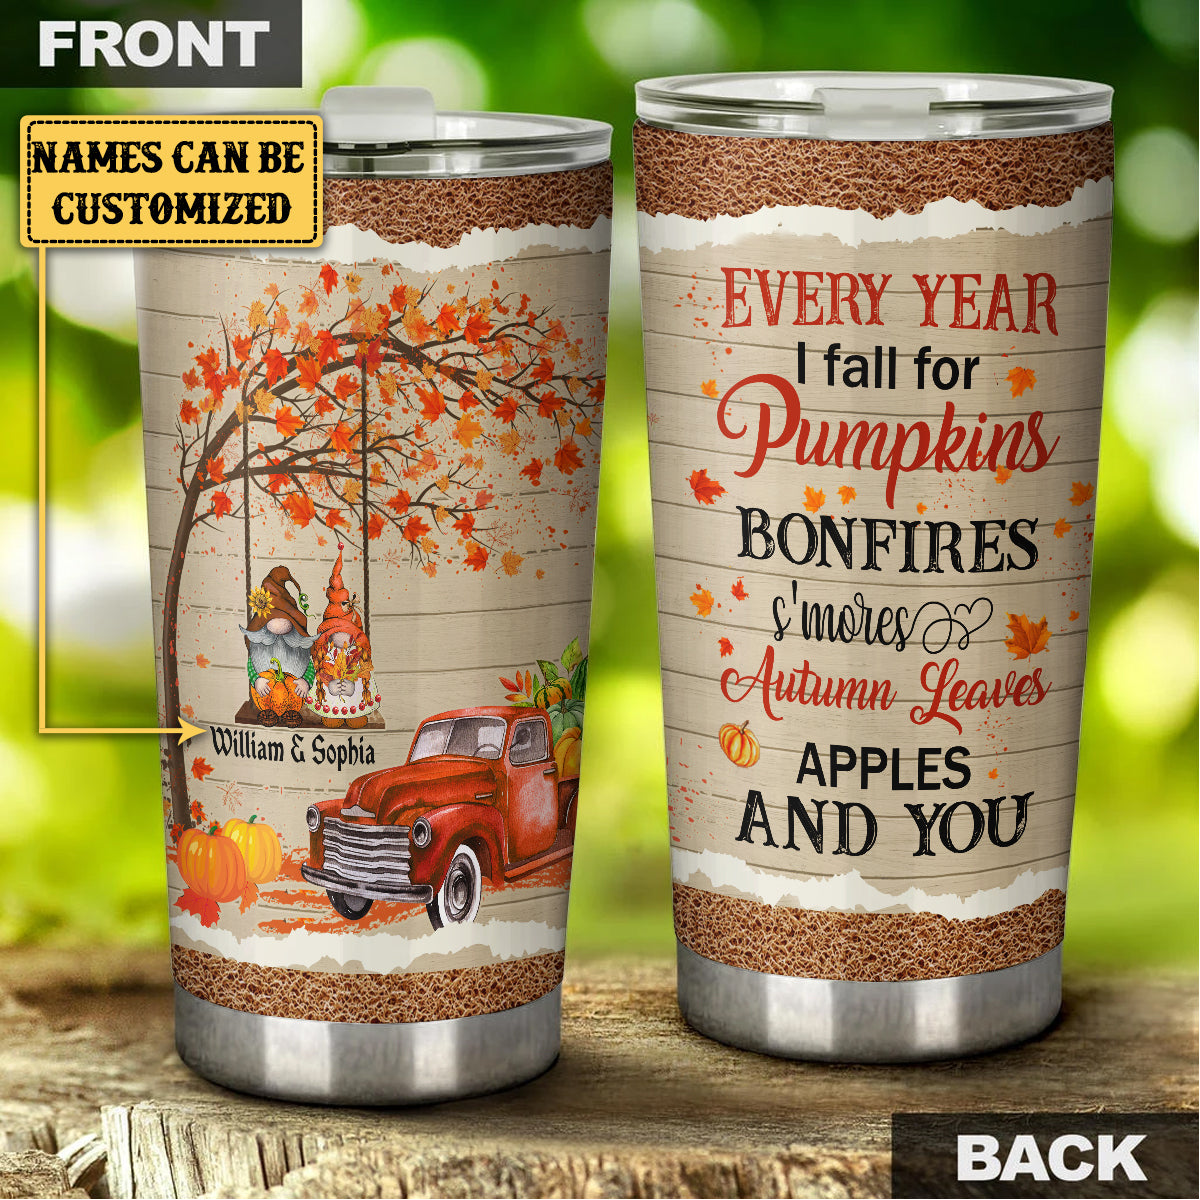 Personalized Every Year I Fall For Pumpkins Bonfires S'mores Autumn Leaves Apples And You Tumbler